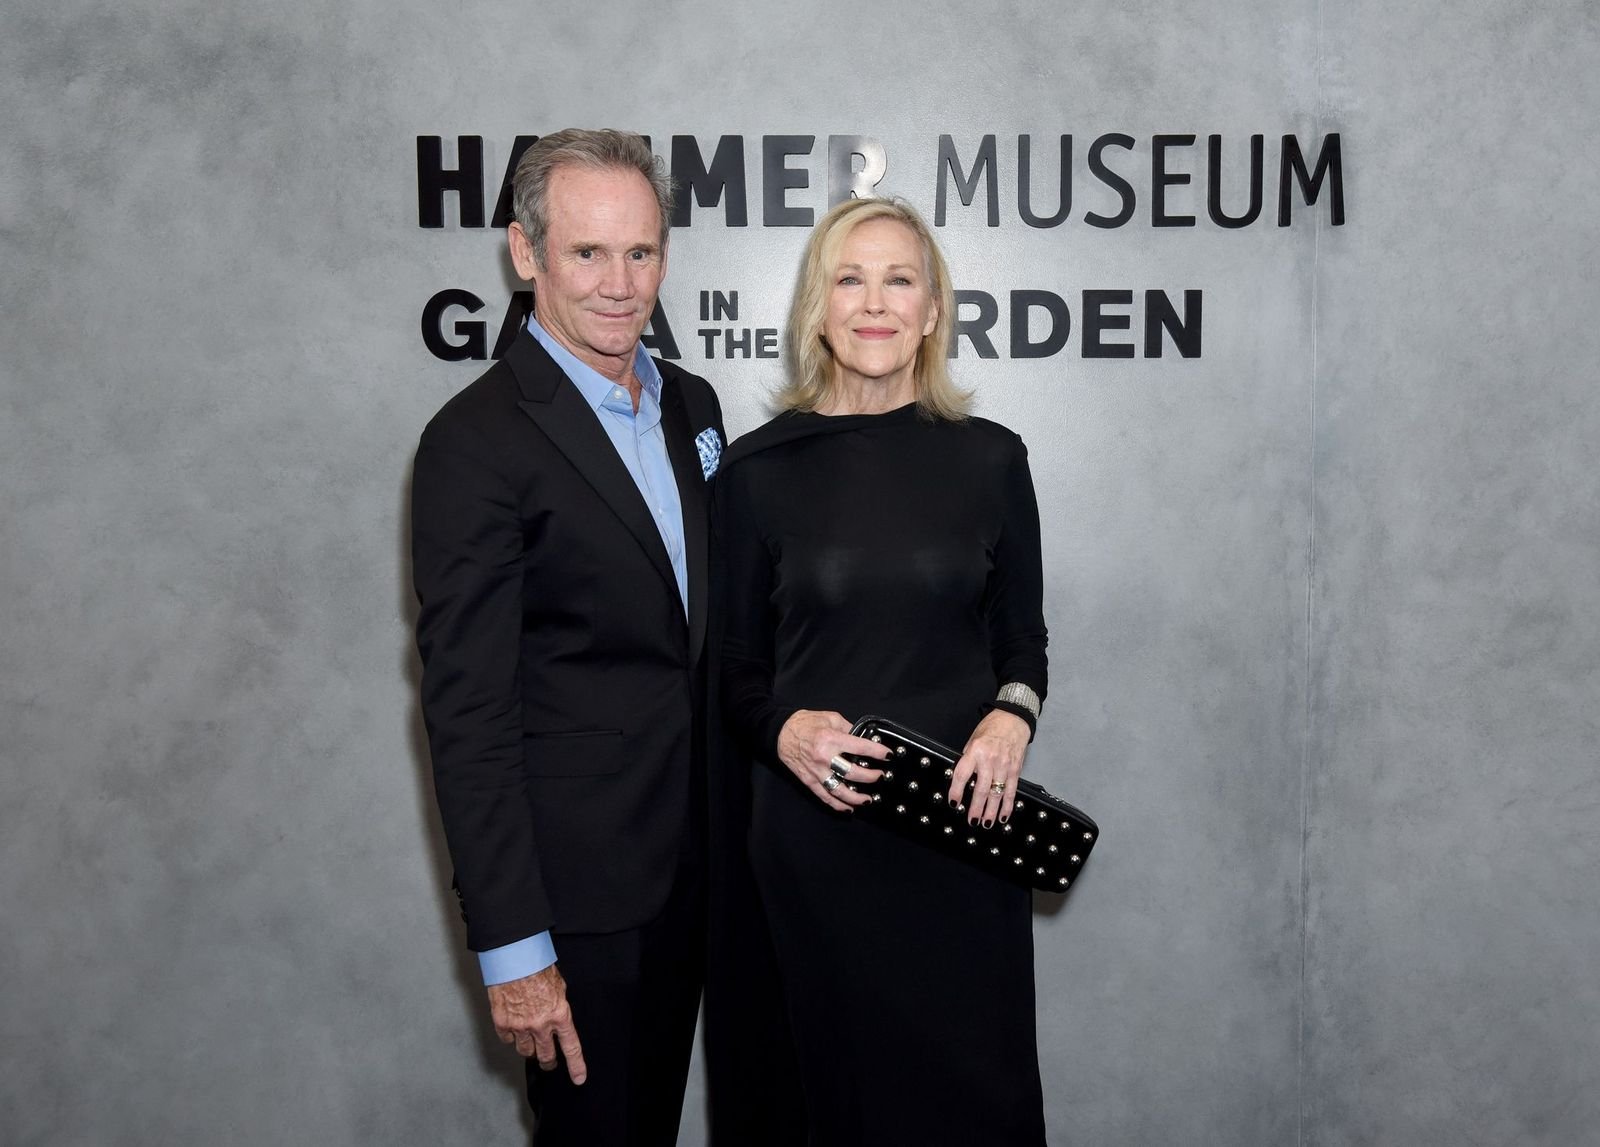 Bo Welch and Catherine O'Hara during the Hammer Museum's 17th Annual Gala In The Garden on October 12, 2019. | Source: Getty Images